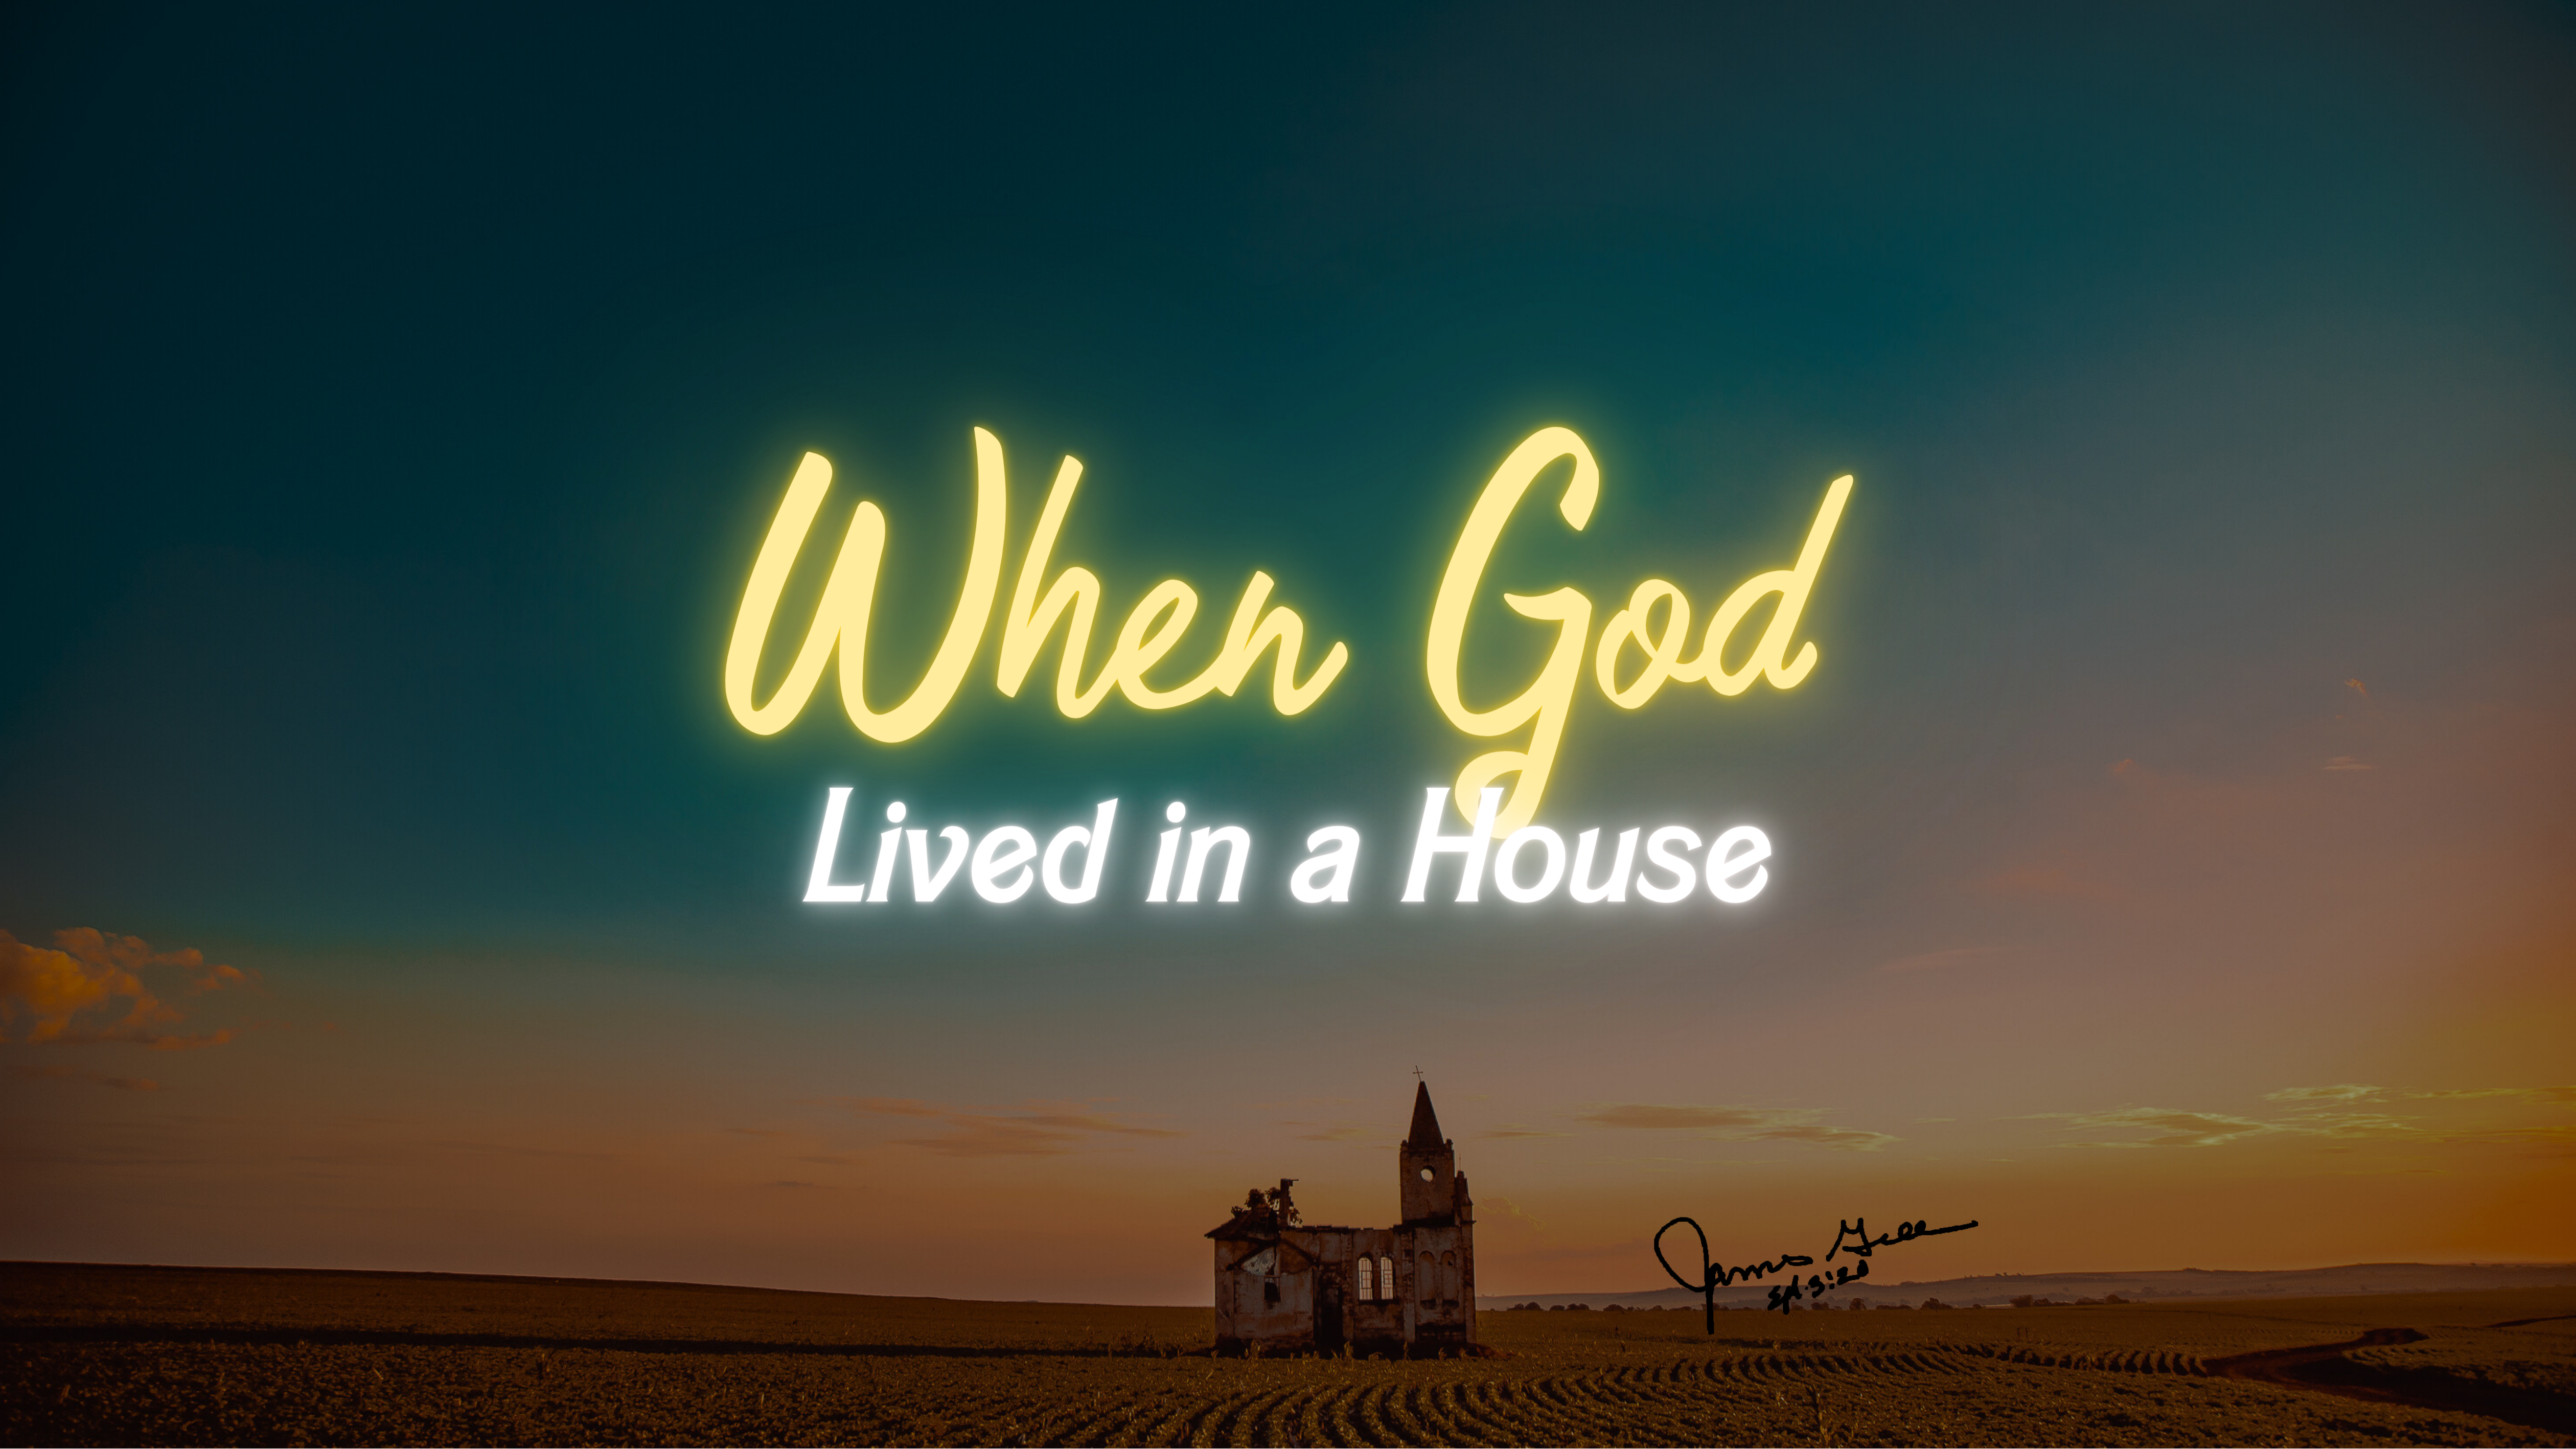 Day 11: When God Lived in a House